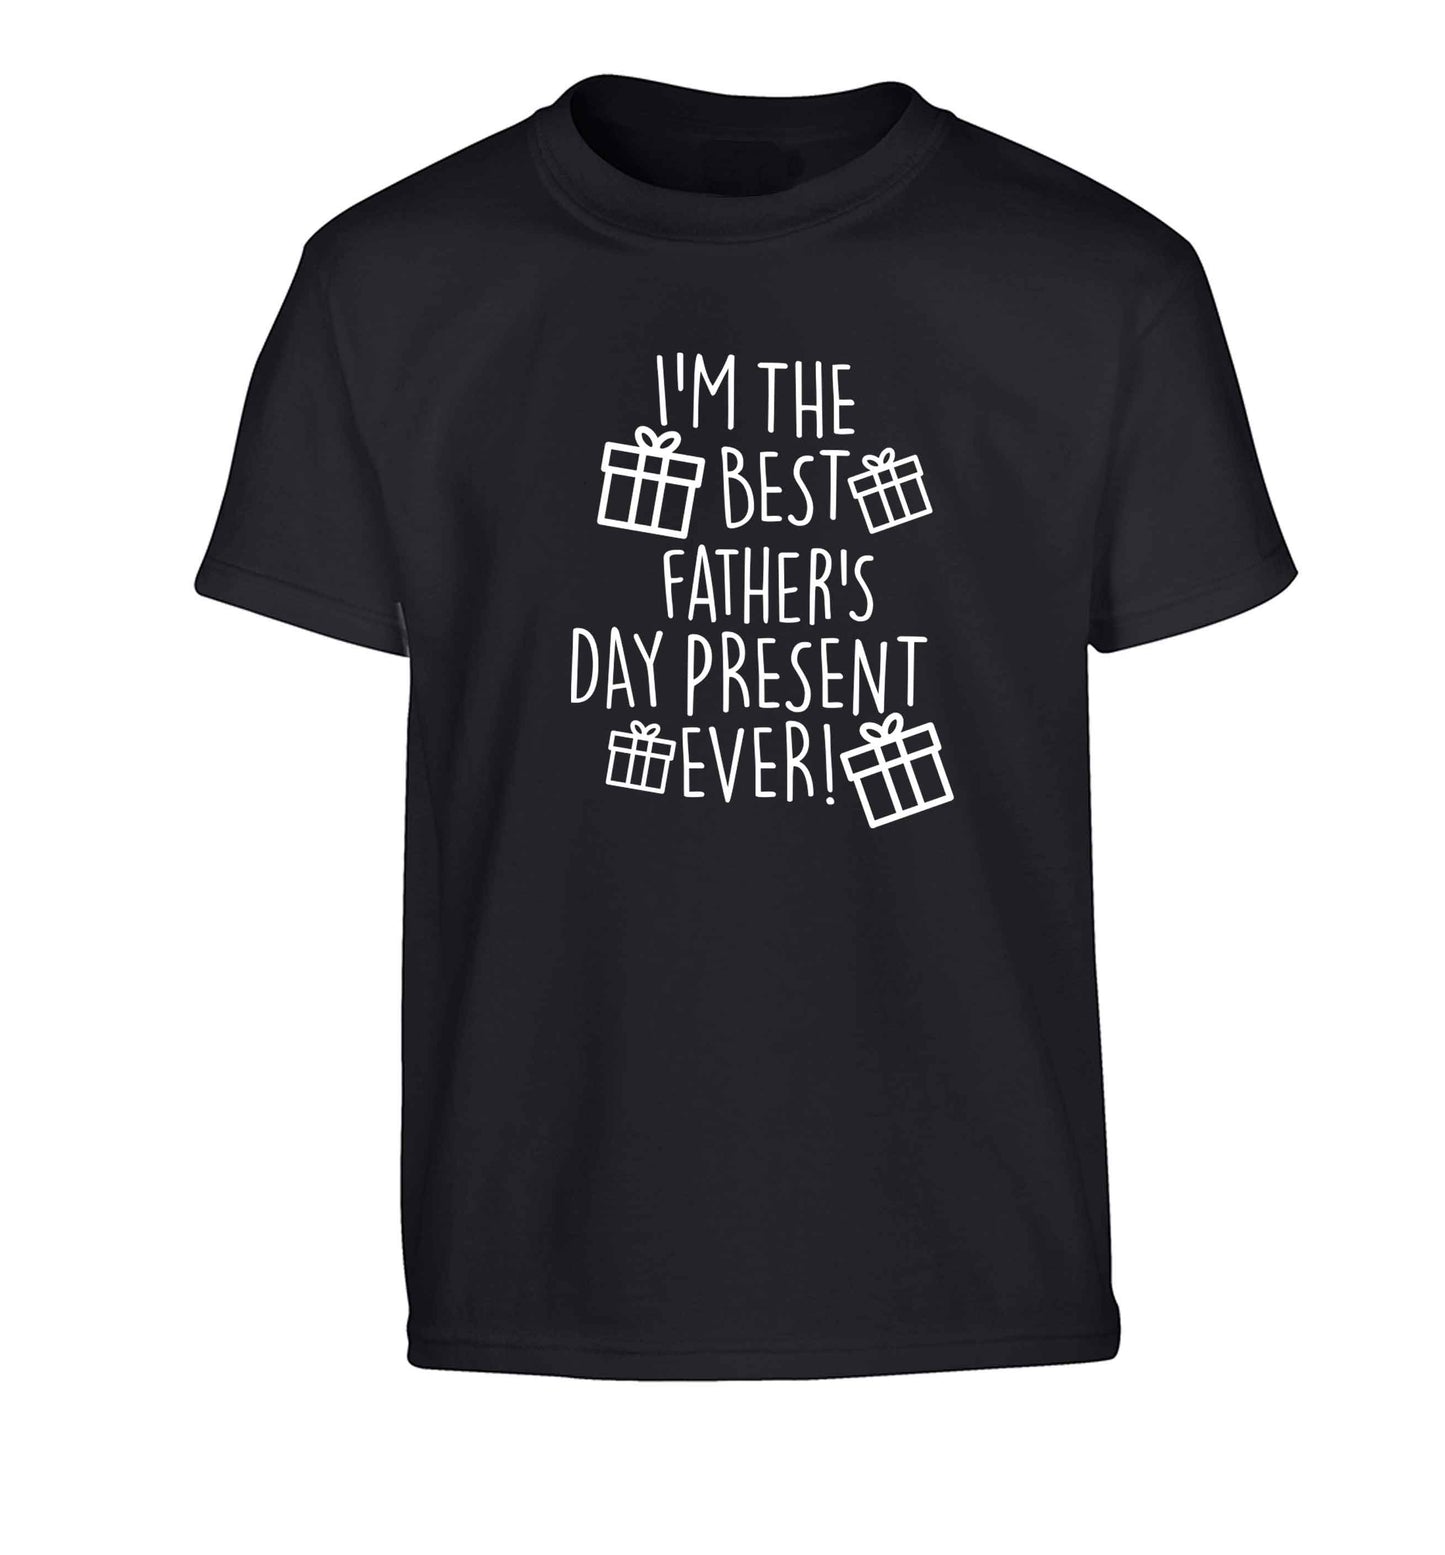 I'm the best father's day present ever!| Children's Tshirt